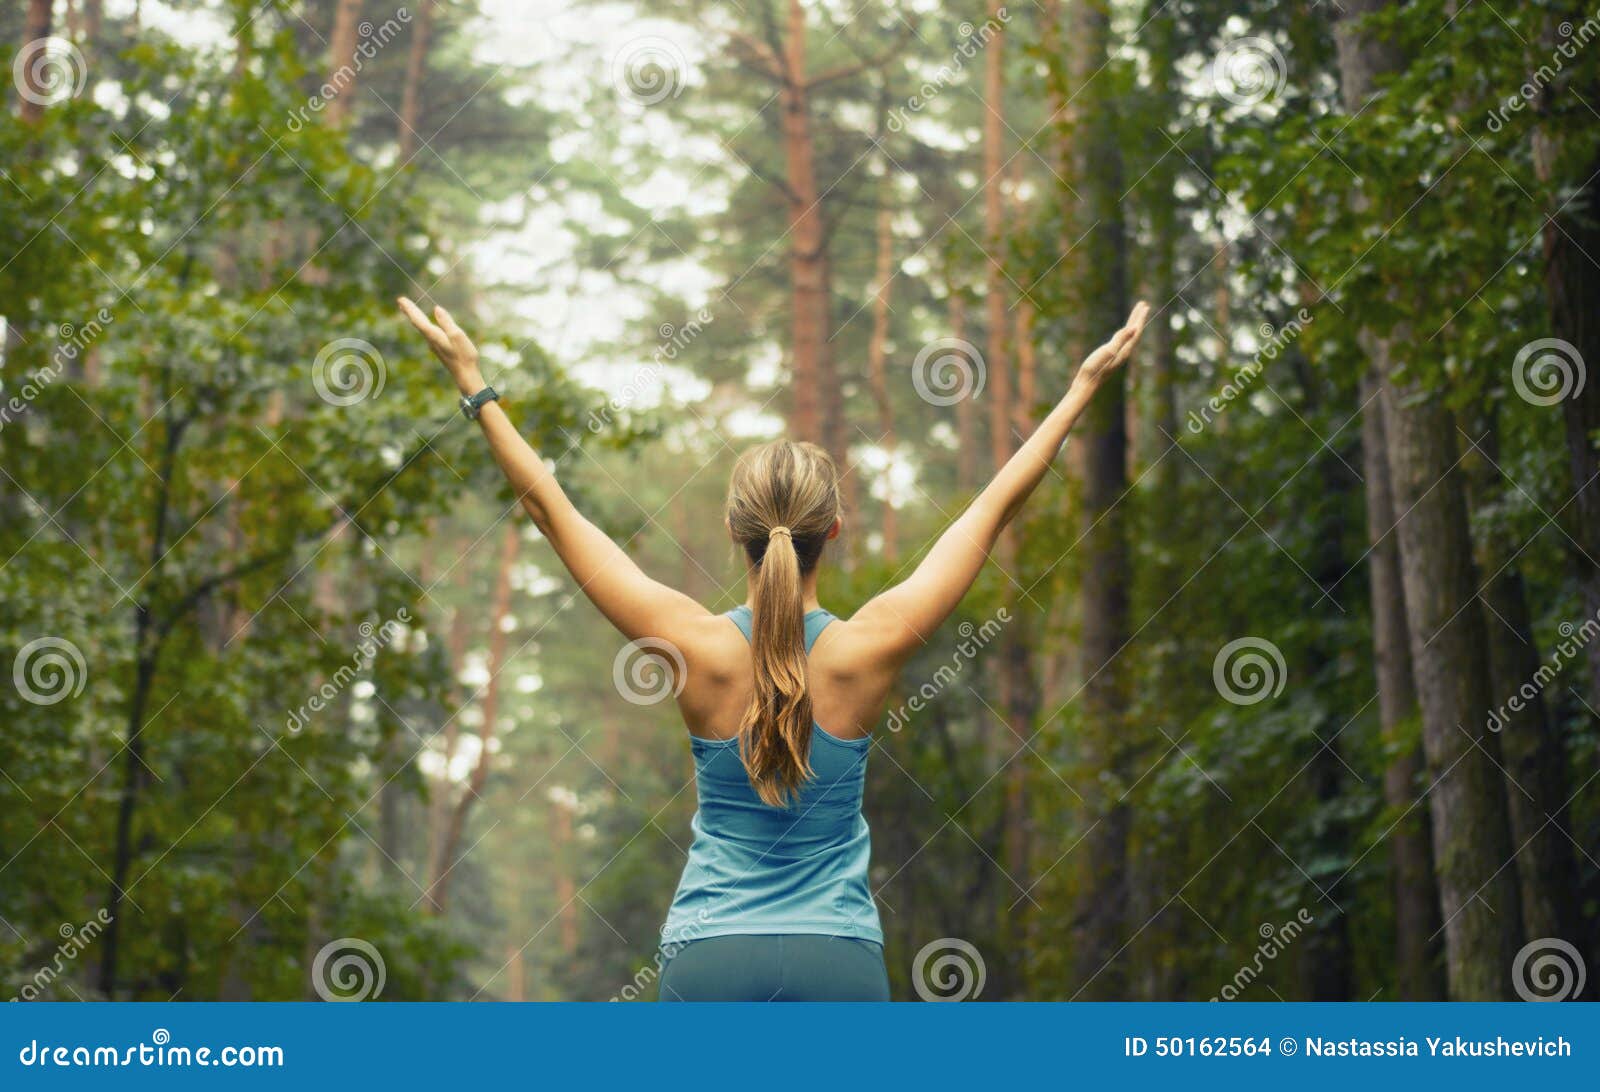 healthy lifestyle fitness sporty woman early in forest area